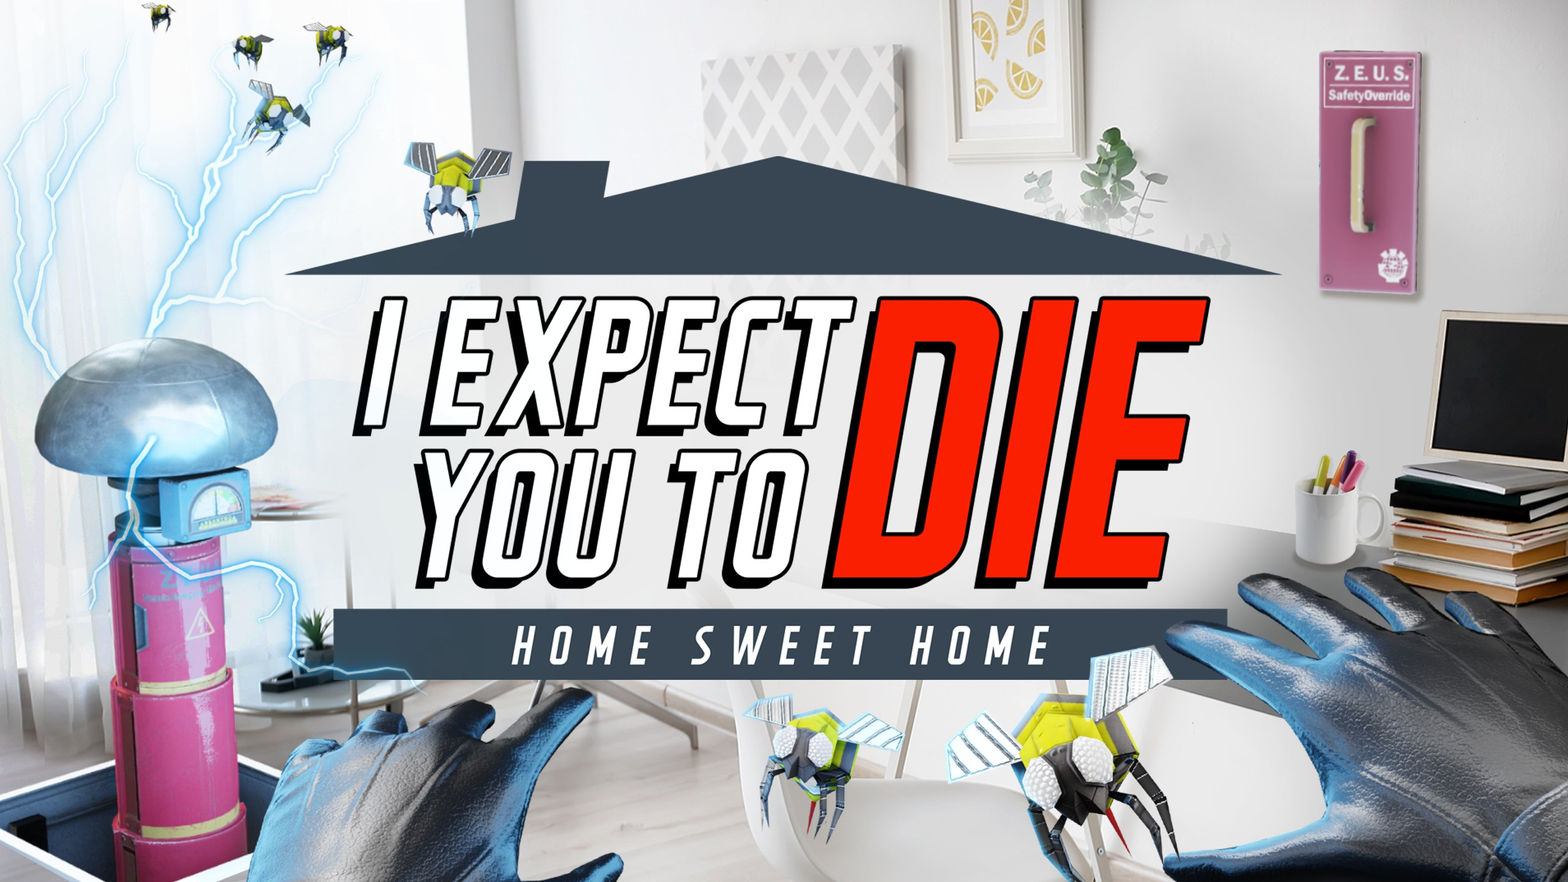 (Now in App Lab) I Expect You To Die: Home Sweet Home